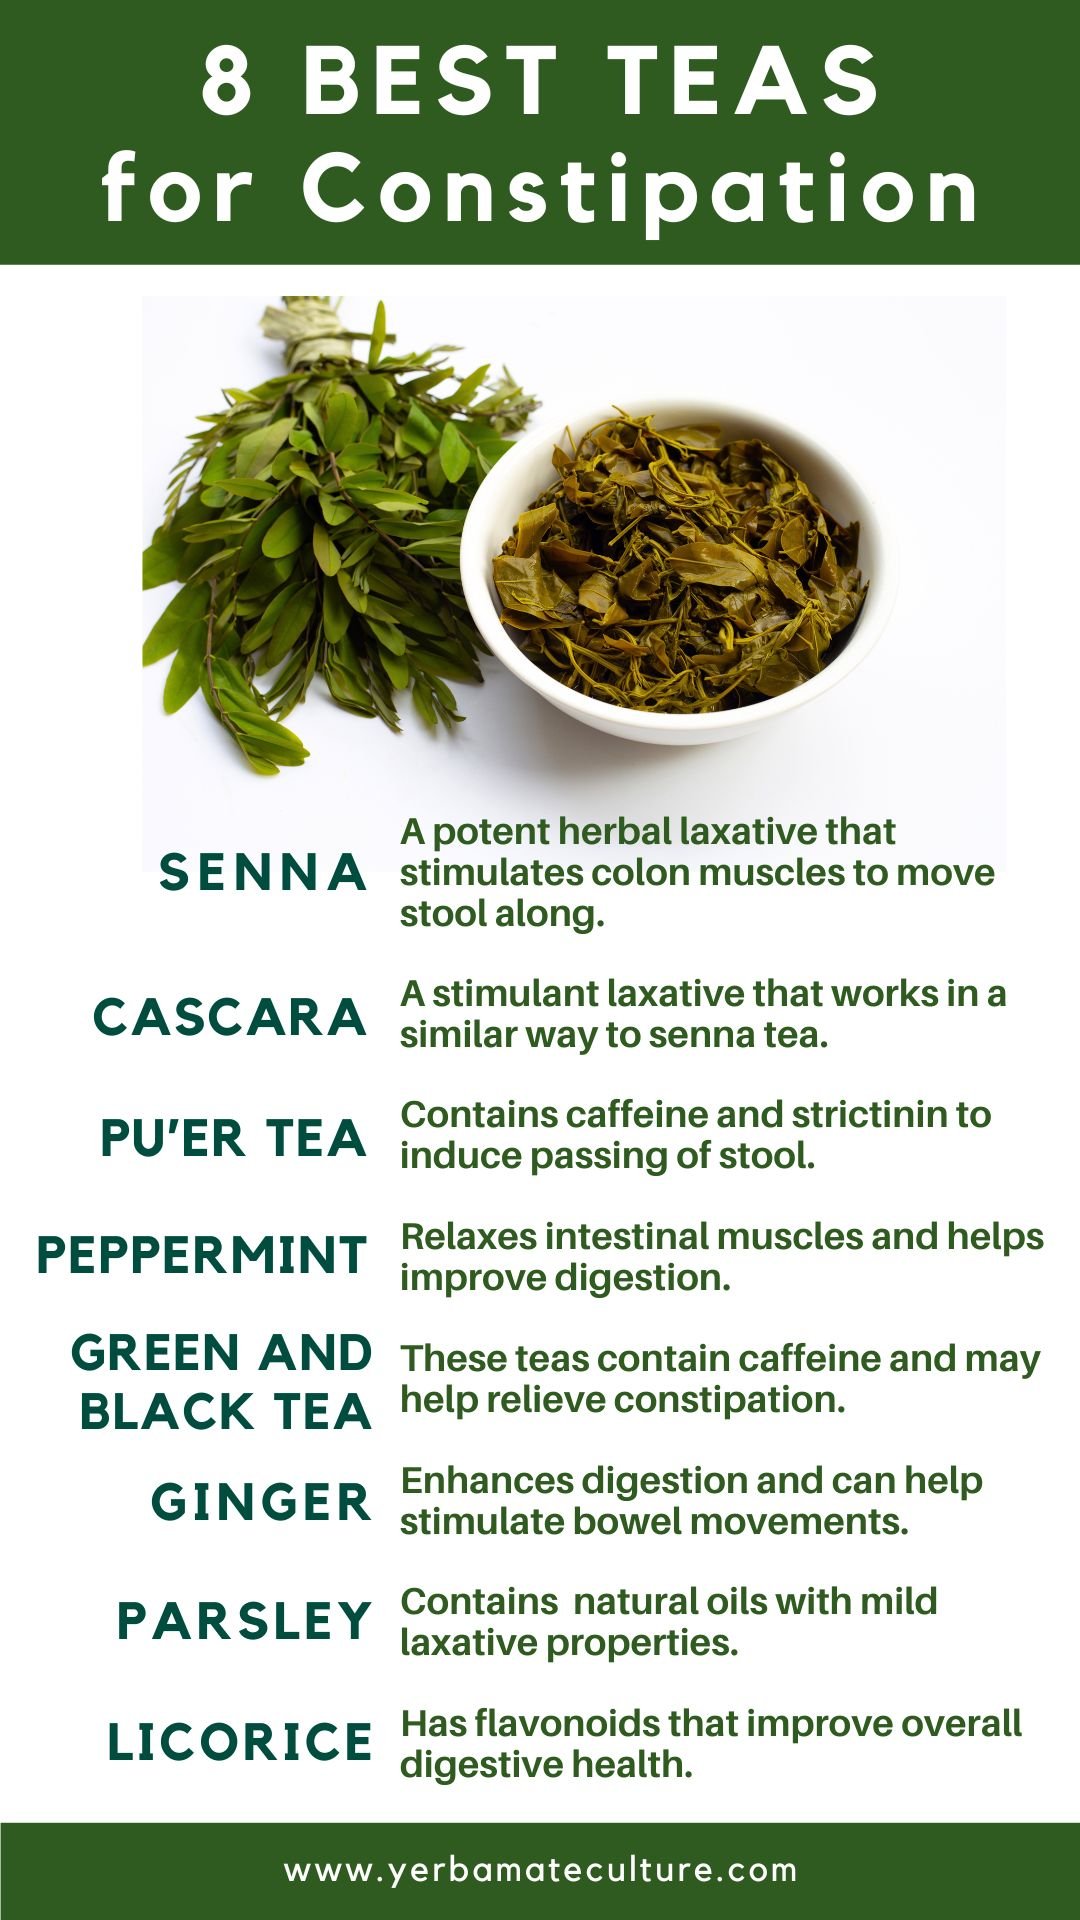 Teas for Constipation